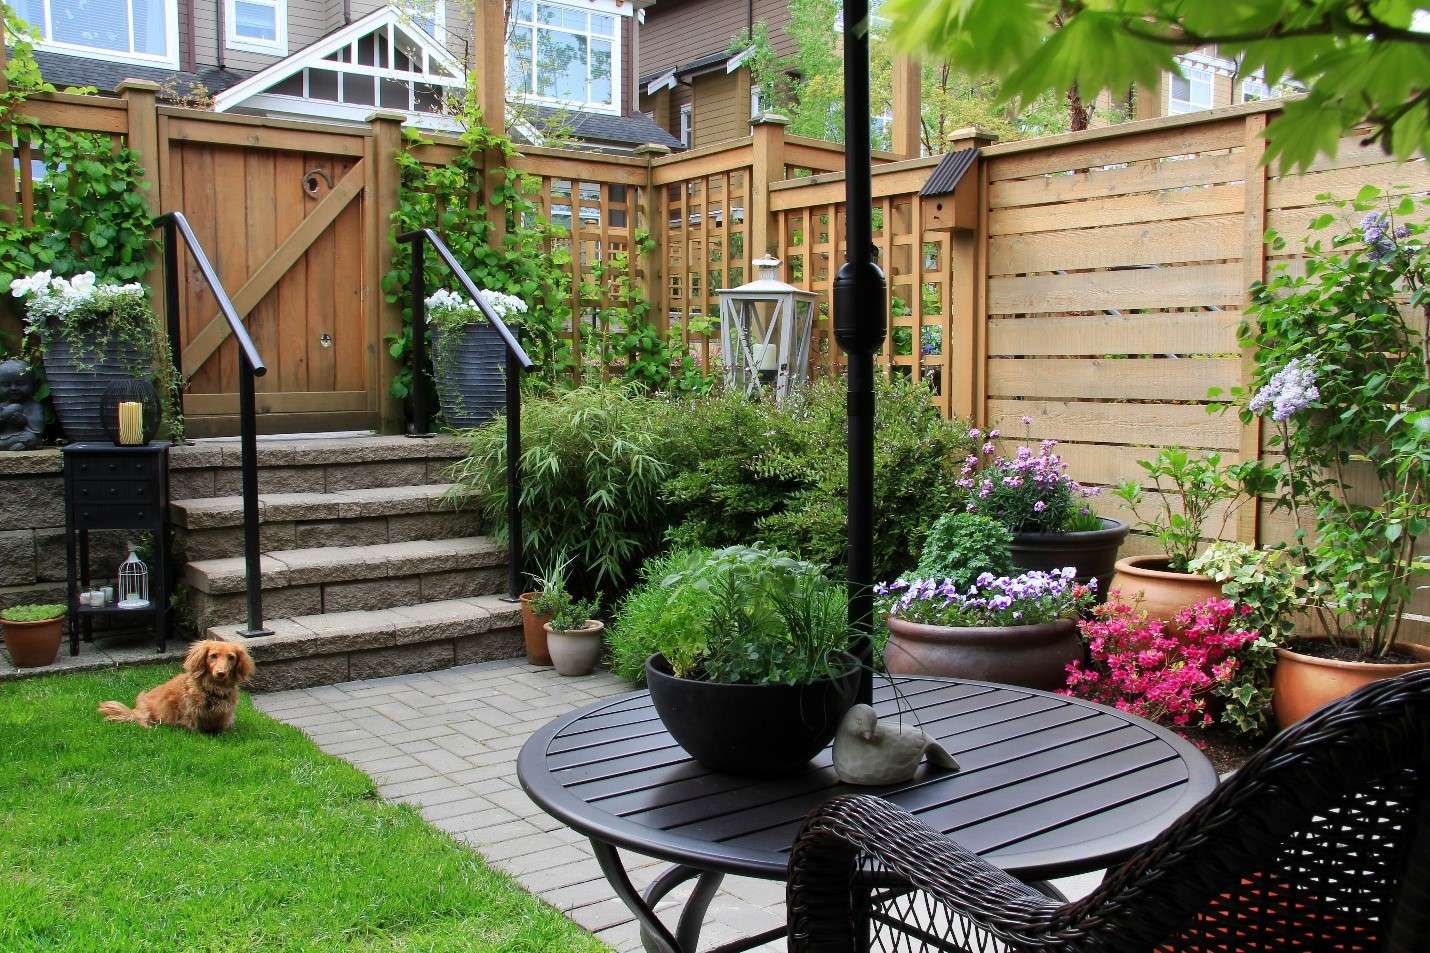 7 Tips to Maximize a Small Outdoor Living Space